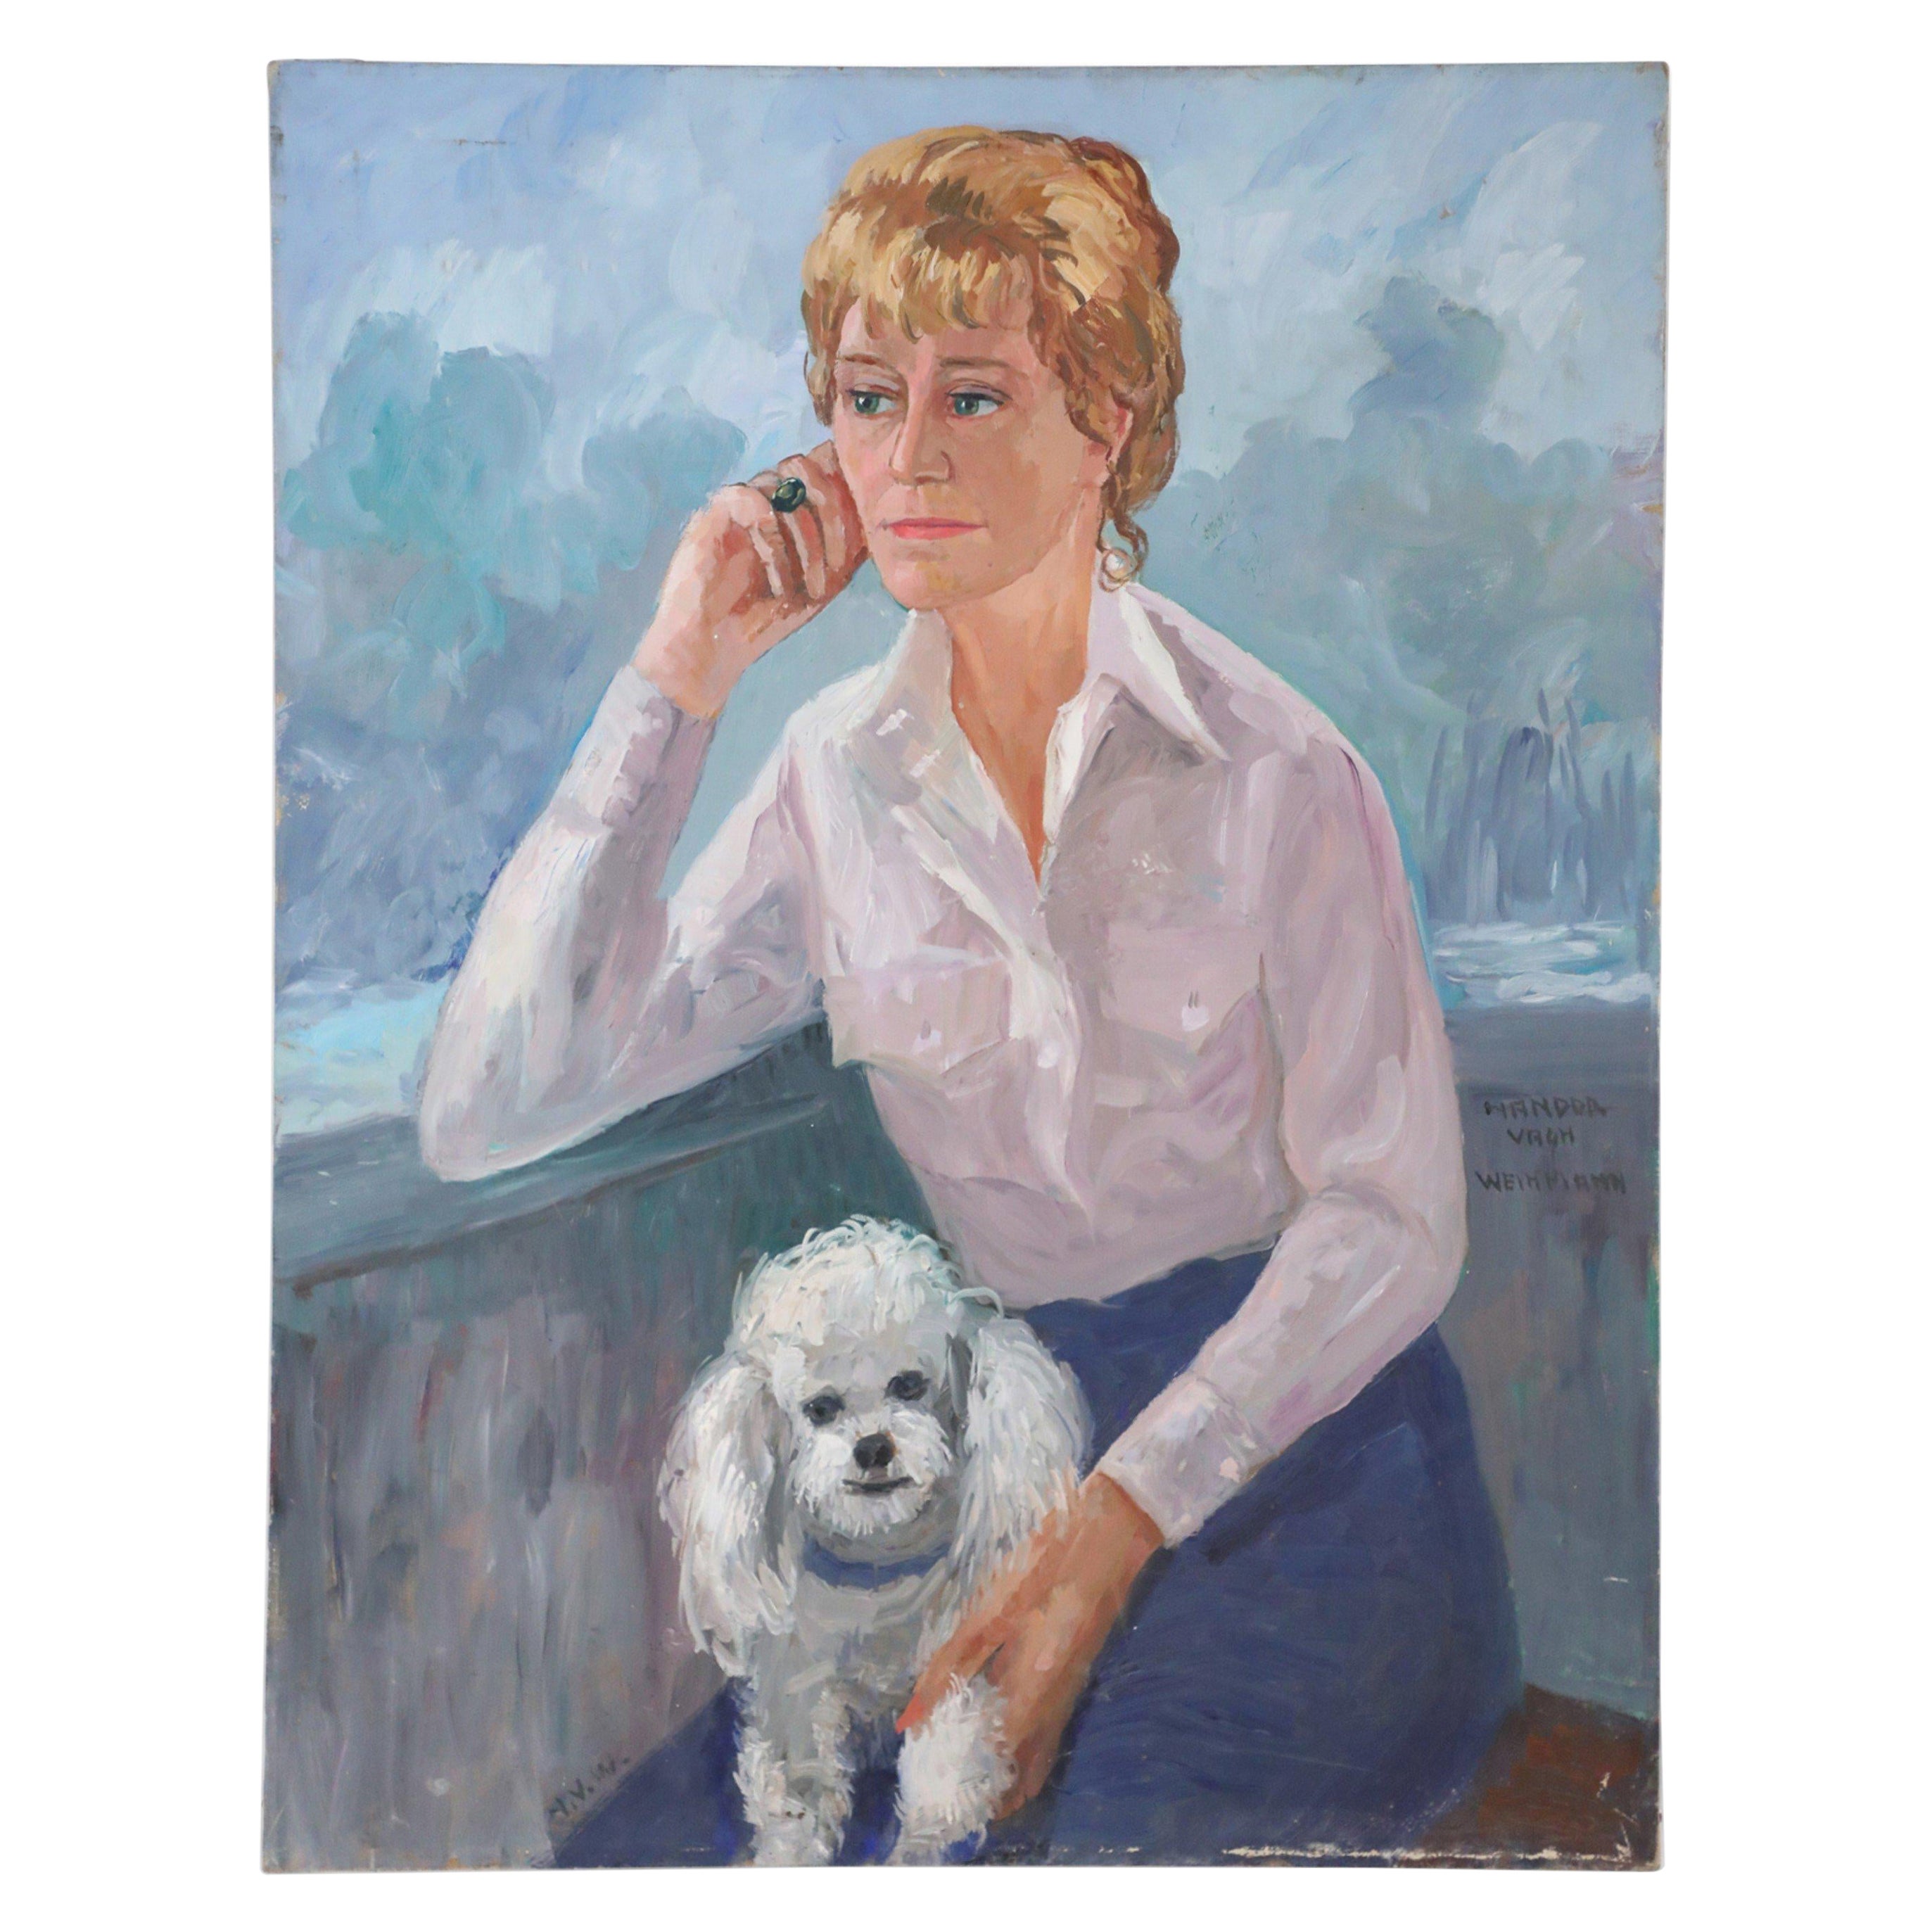 Portrait of a Woman and White Dog Painting on Canvas